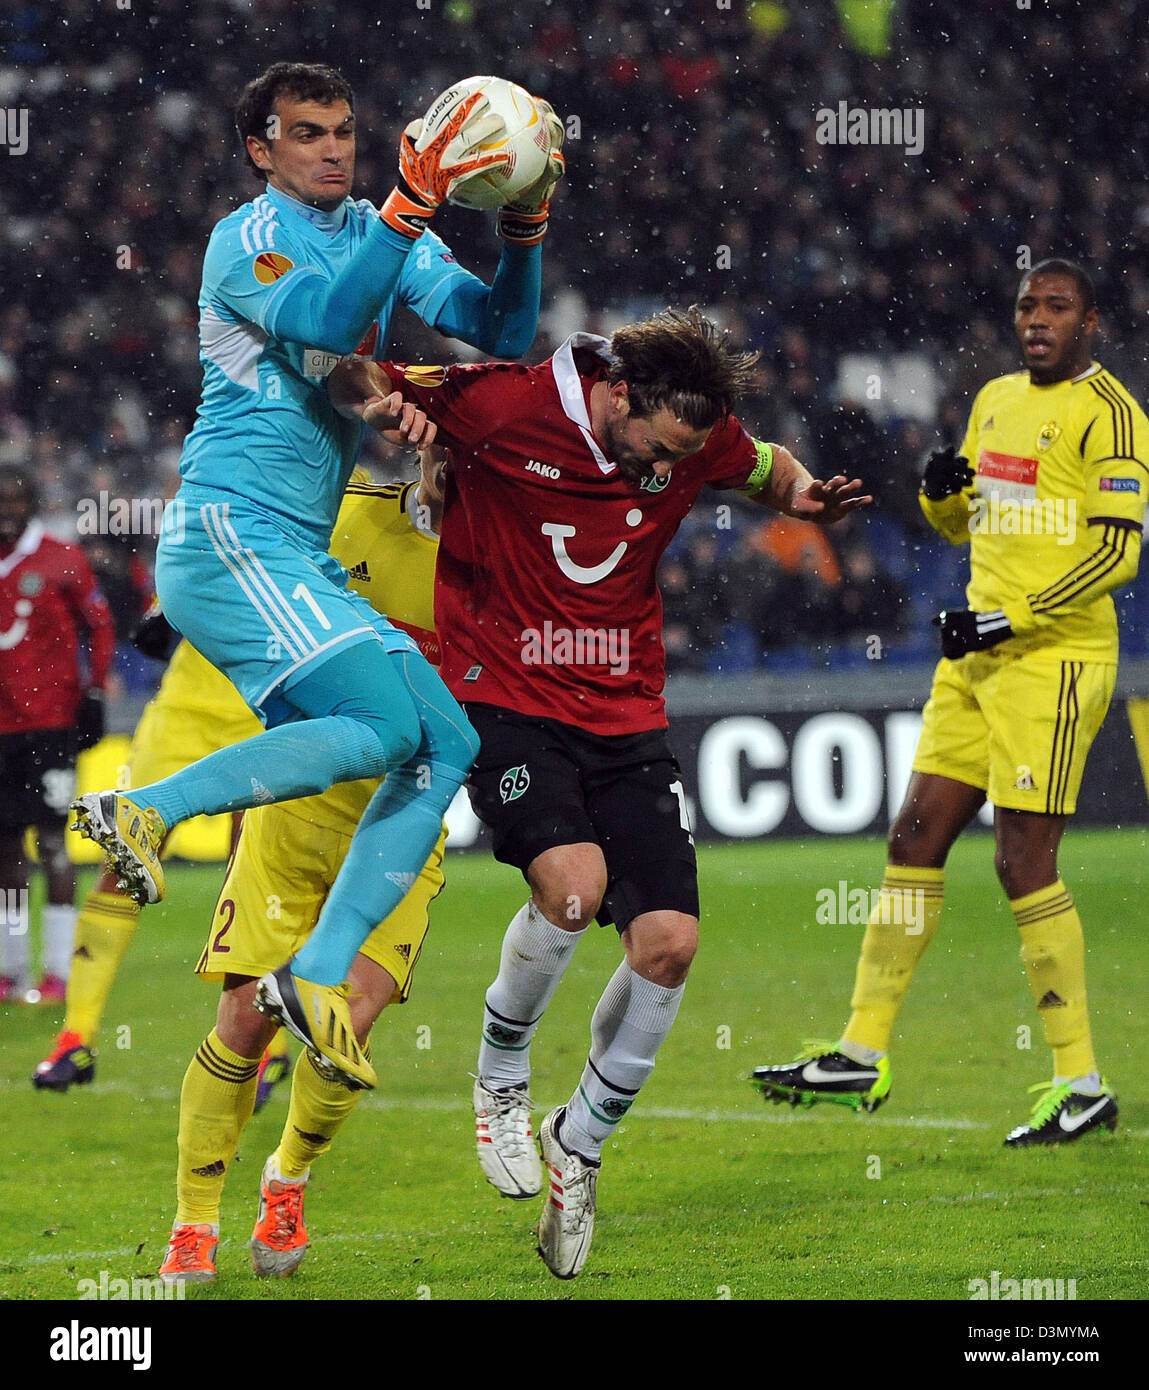 Hanover's Christian Schulz (C) and Makhachkala's goalkeeper Vladimir Gabulov (L) vie for the ball during the UEFA Europa League round of 32 second leg soccer match between Hanover 96 and FC Anzhi Makhachkala at Hannover Arena in Hanover, Germany, 21 February 2013. Photo: Peter Steffen/dpa +++(c) dpa - Bildfunk+++ Stock Photo